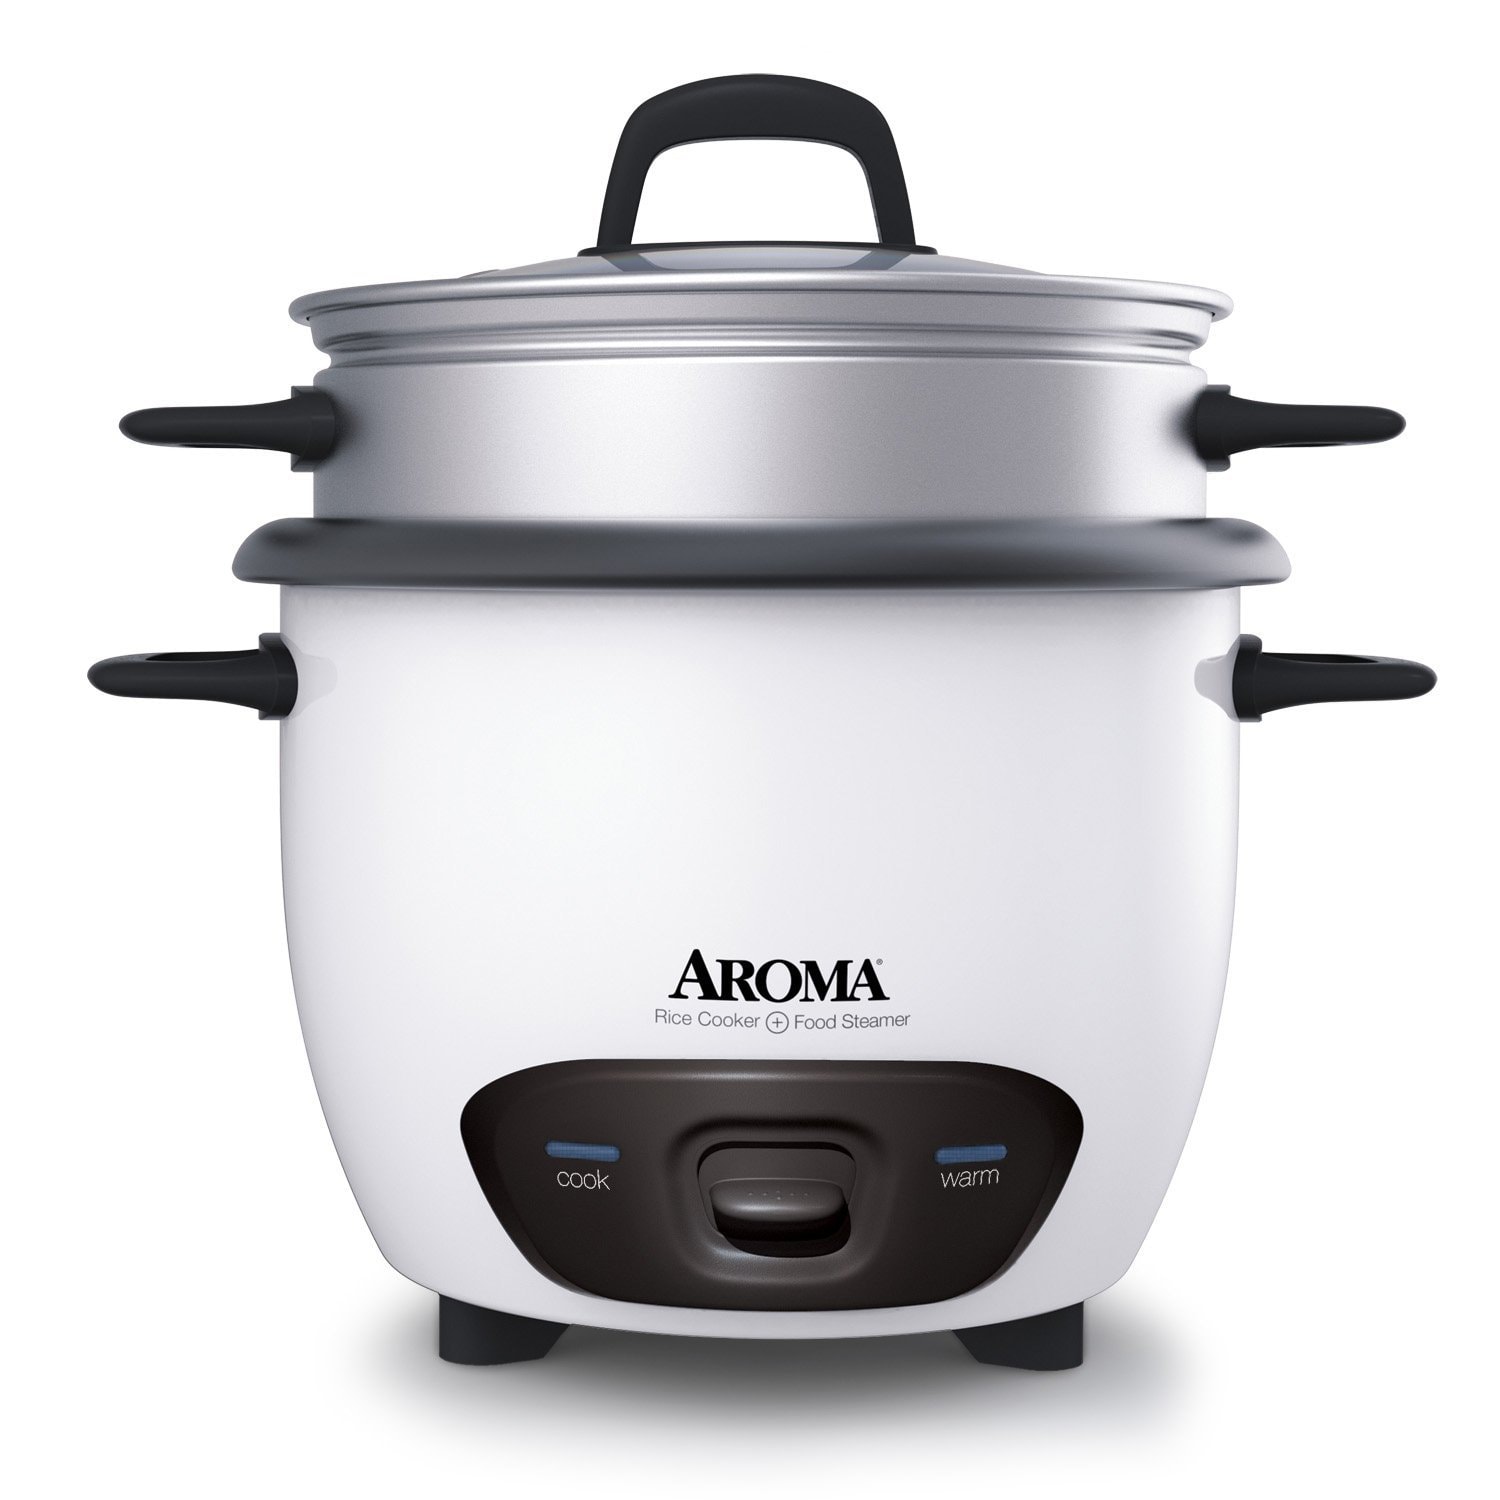 https://ak1.ostkcdn.com/images/products/6150662/6150662/Aroma-3-cup-Rice-CookerAroma-3-cup-Rice-Cooker-L13809804.jpg